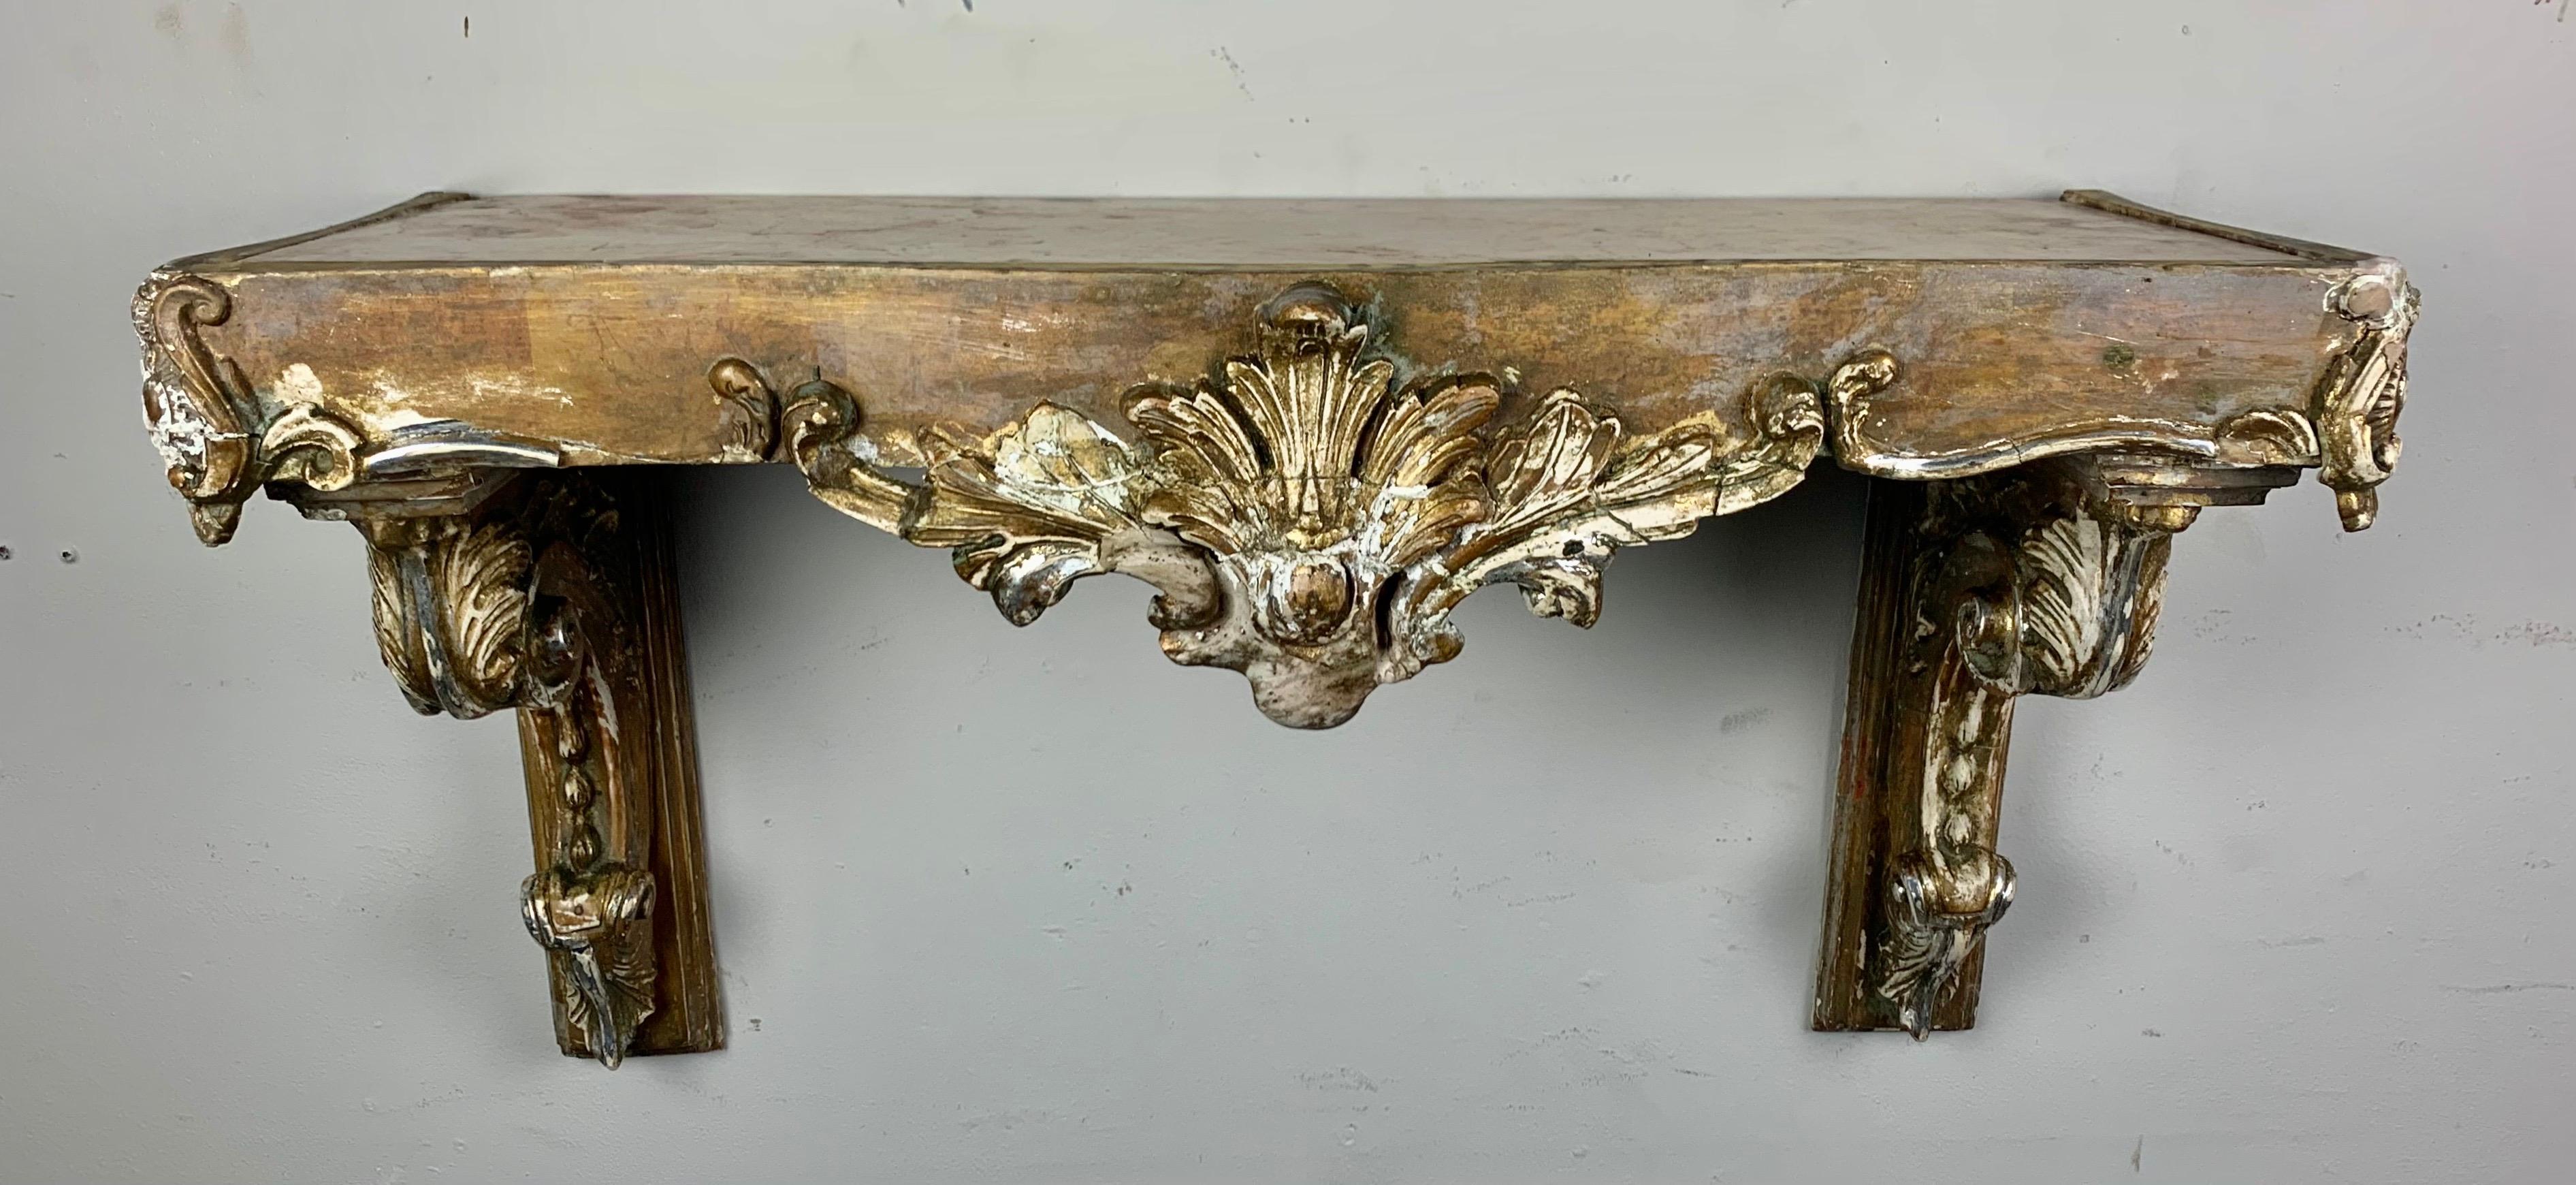 19th century Italian carved painted and parcel-gilt shelf with marble top.